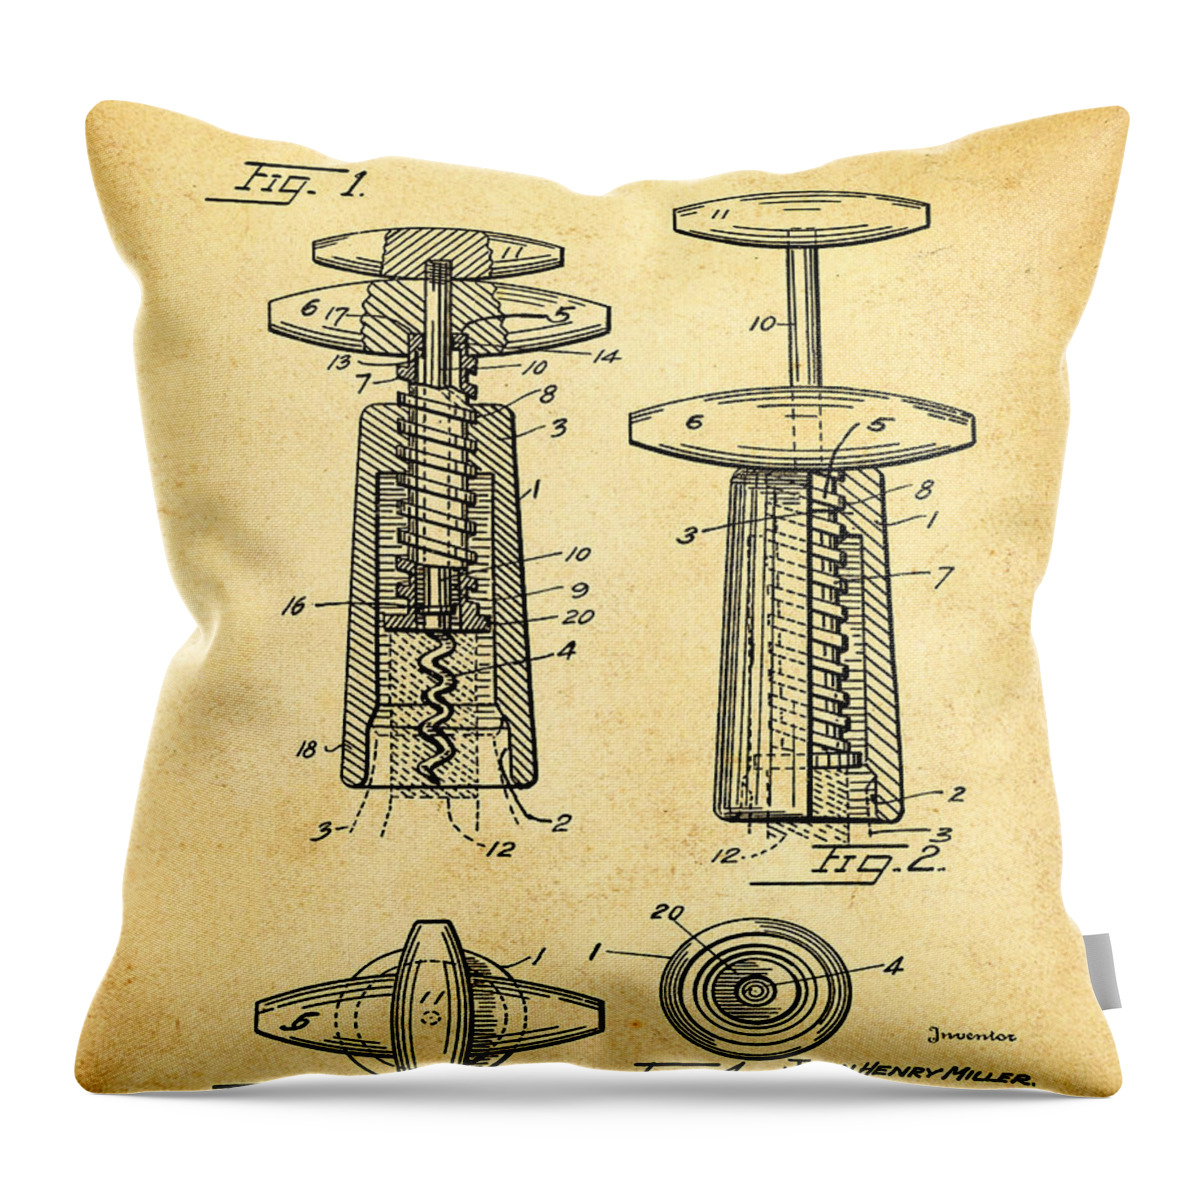 Corkscrew Throw Pillow featuring the photograph Corkscrew Patent 1944 Vintage Sepia by Bill Cannon